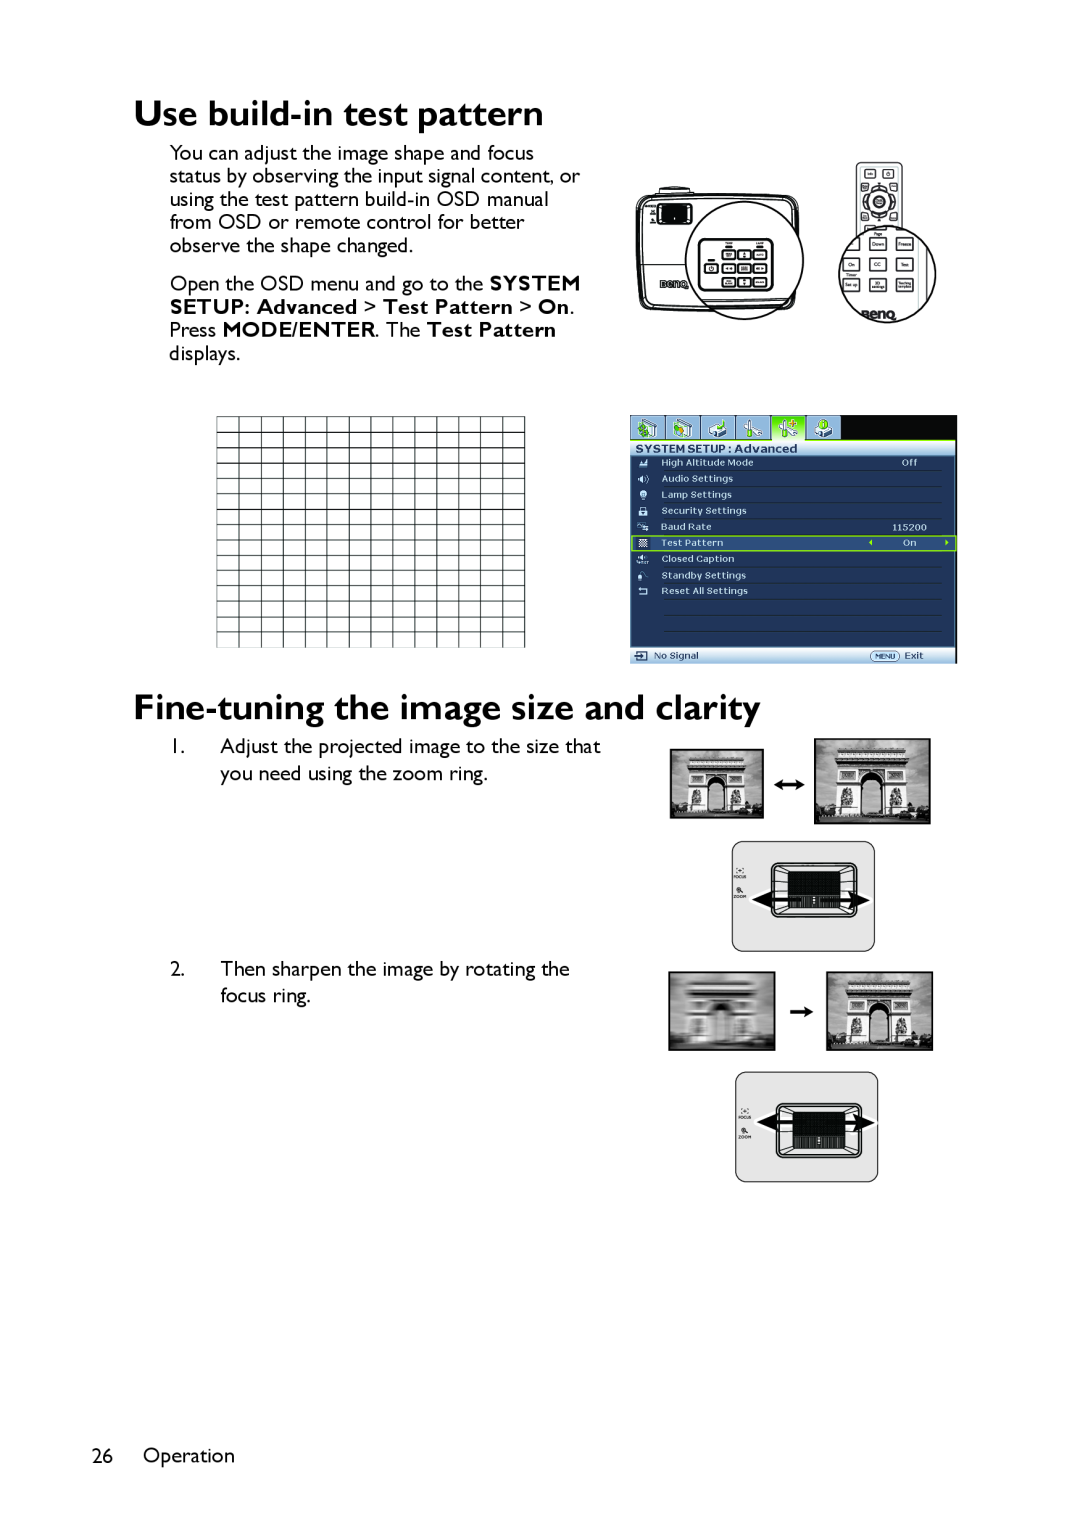 BenQ MS521 user manual Use build-in test pattern, Fine-tuning the image size and clarity 